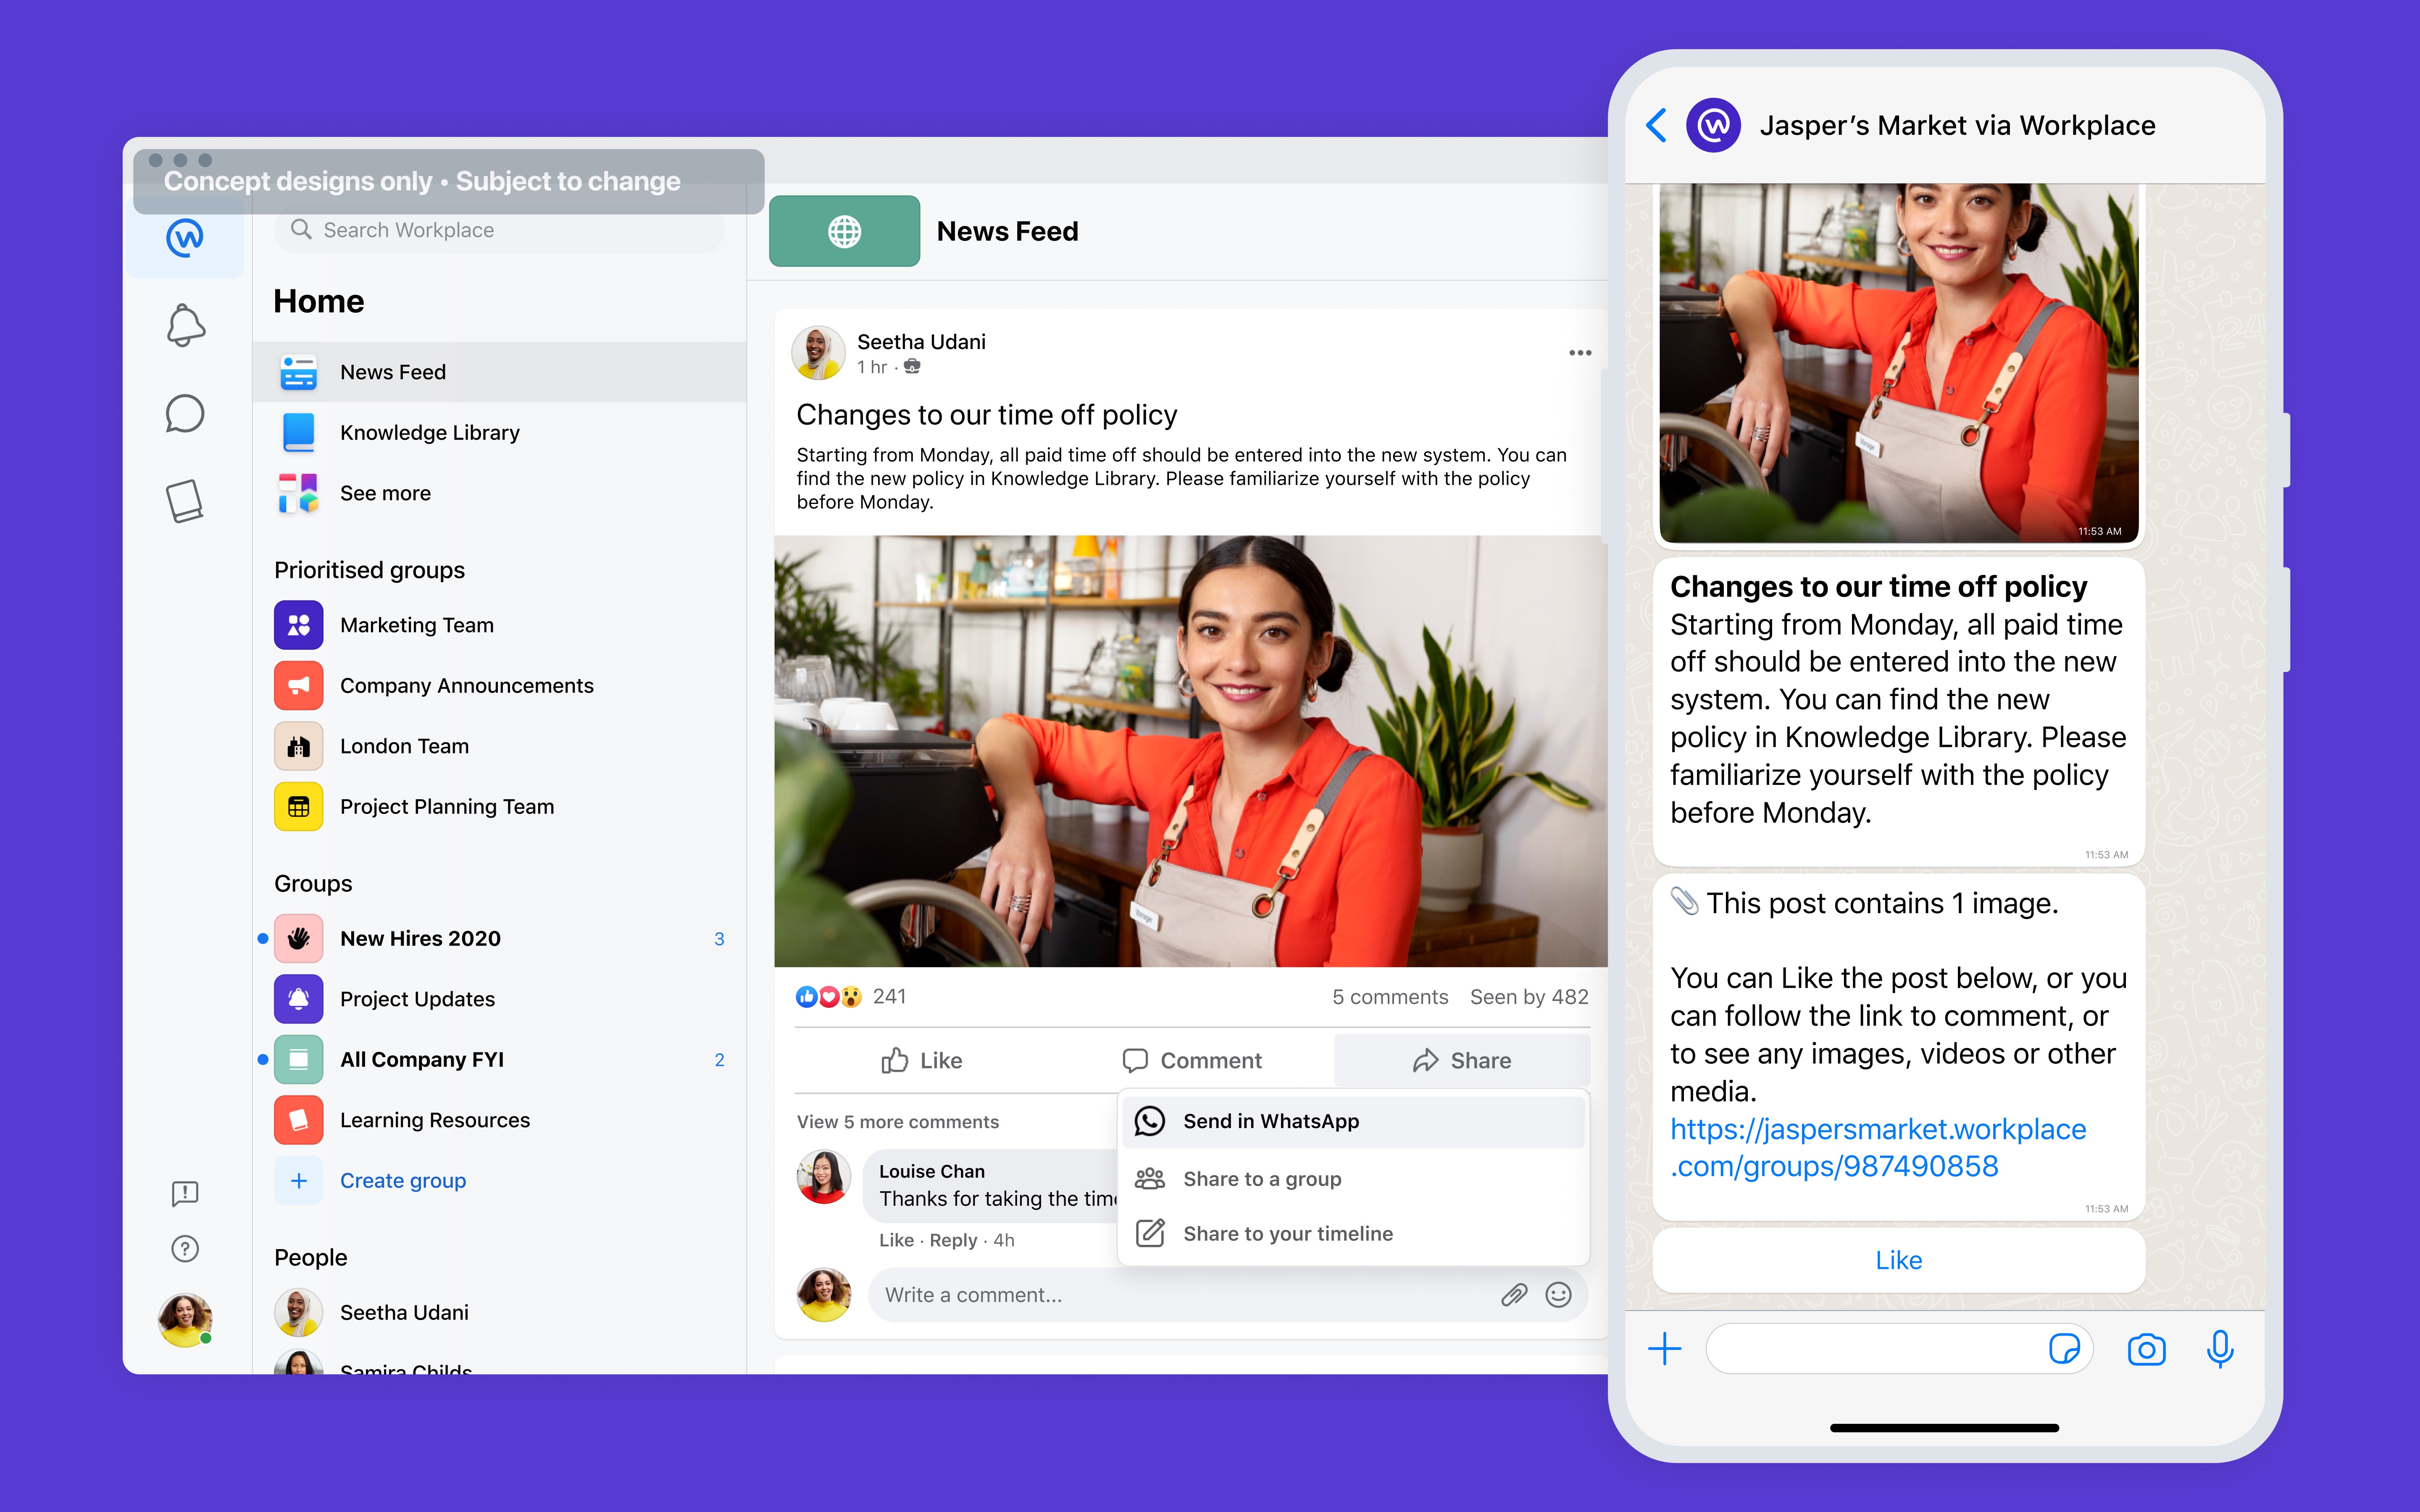 Meta’s Workplace will integrate with WhatsApp later this year to expand communication with front-line employees